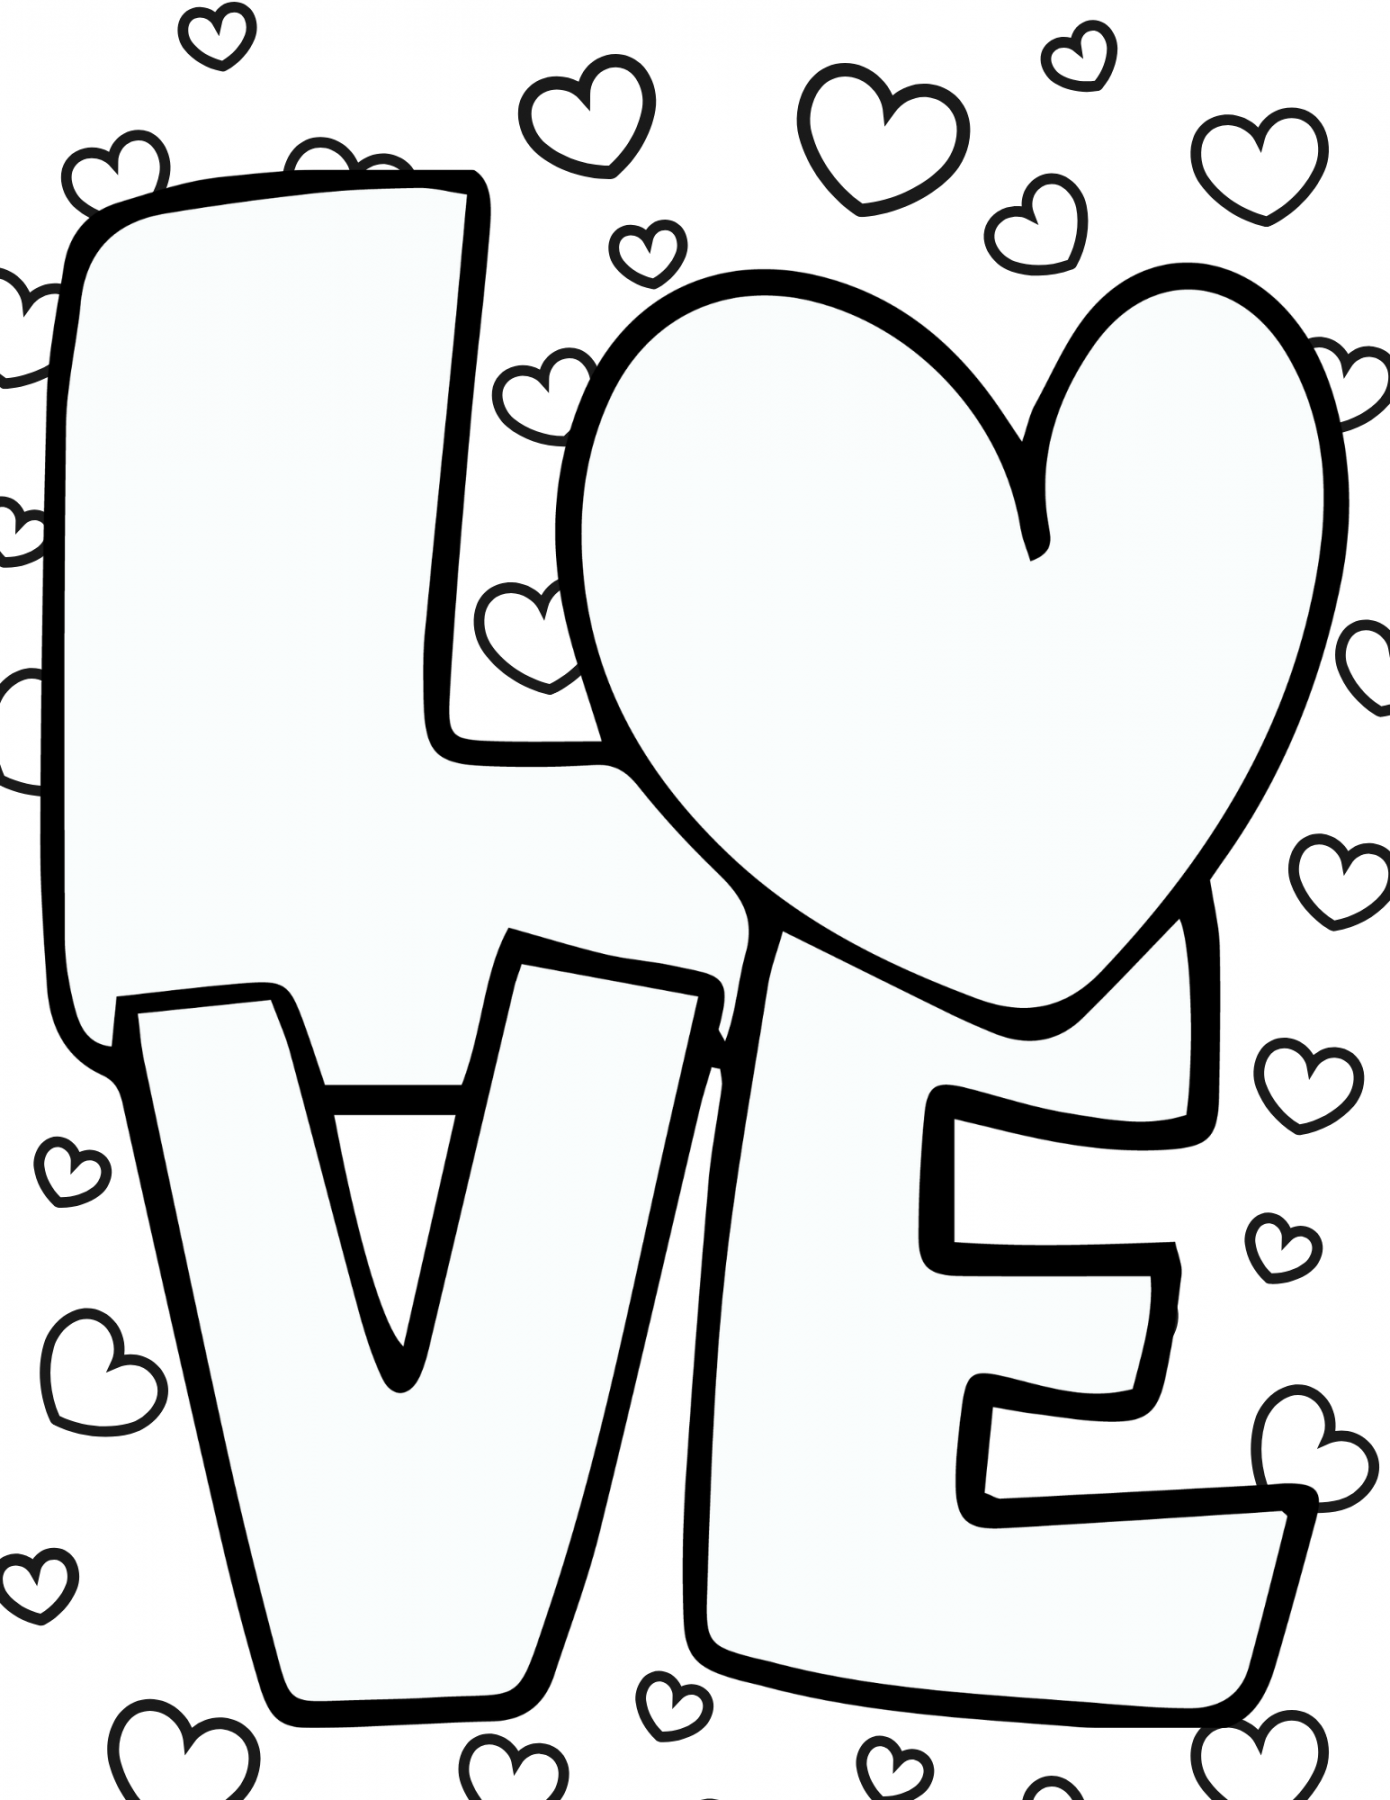 Printable Free Coloring Pages - Printable - Free Printable Love Coloring Pages for Kids and Adults